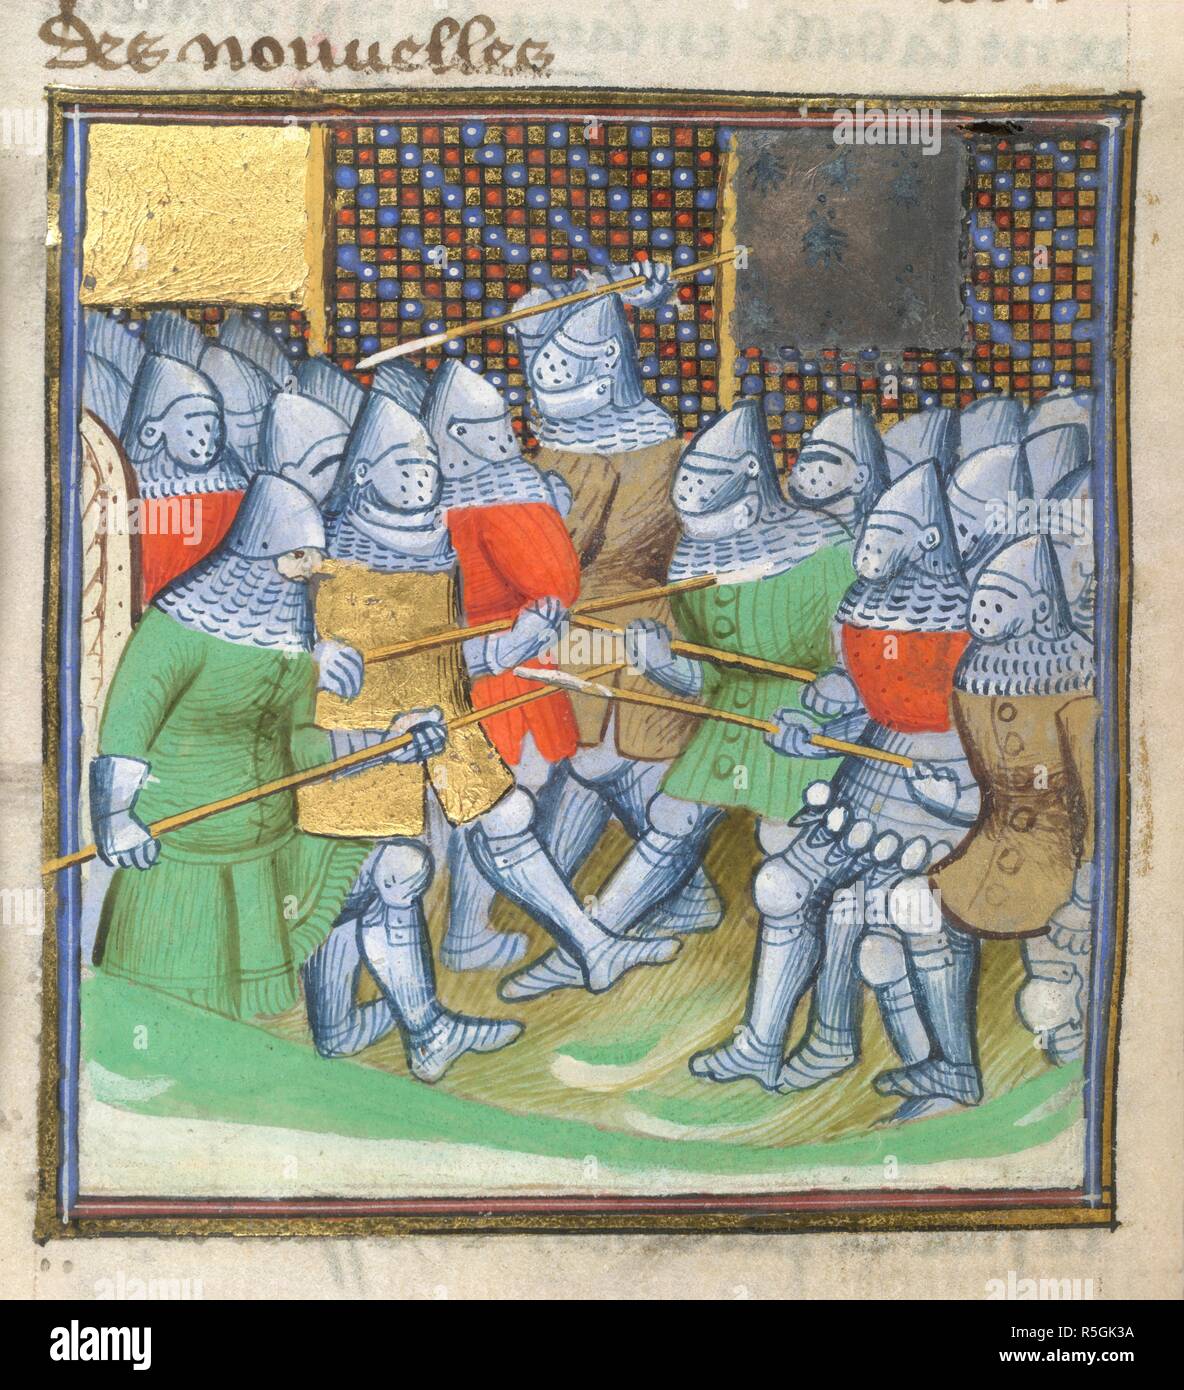 Medieval soldiers fighting. "Les Croniques DangLeterre" (Chroniques d'Angleterre). 15th century. Source: Arundel 67 (part 1), f.341v. Language: French. Author: FROISSART, JEAN. Stock Photo